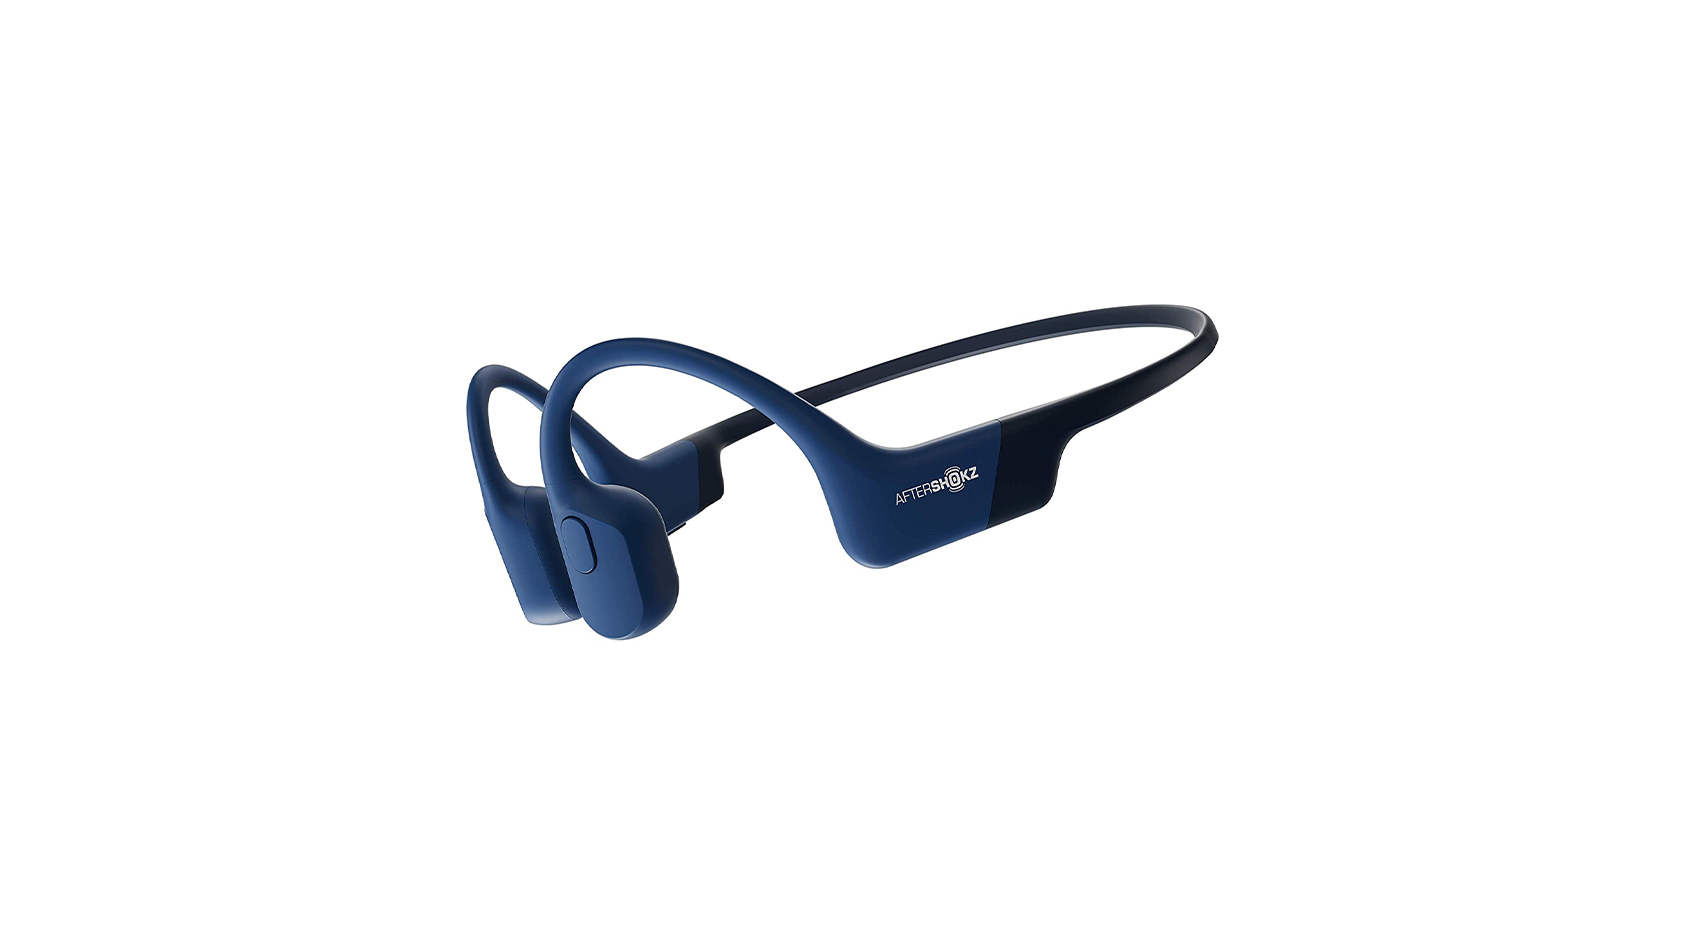 The Aftershokz Aeropex bone conduction headphones in navy blue against a white background.